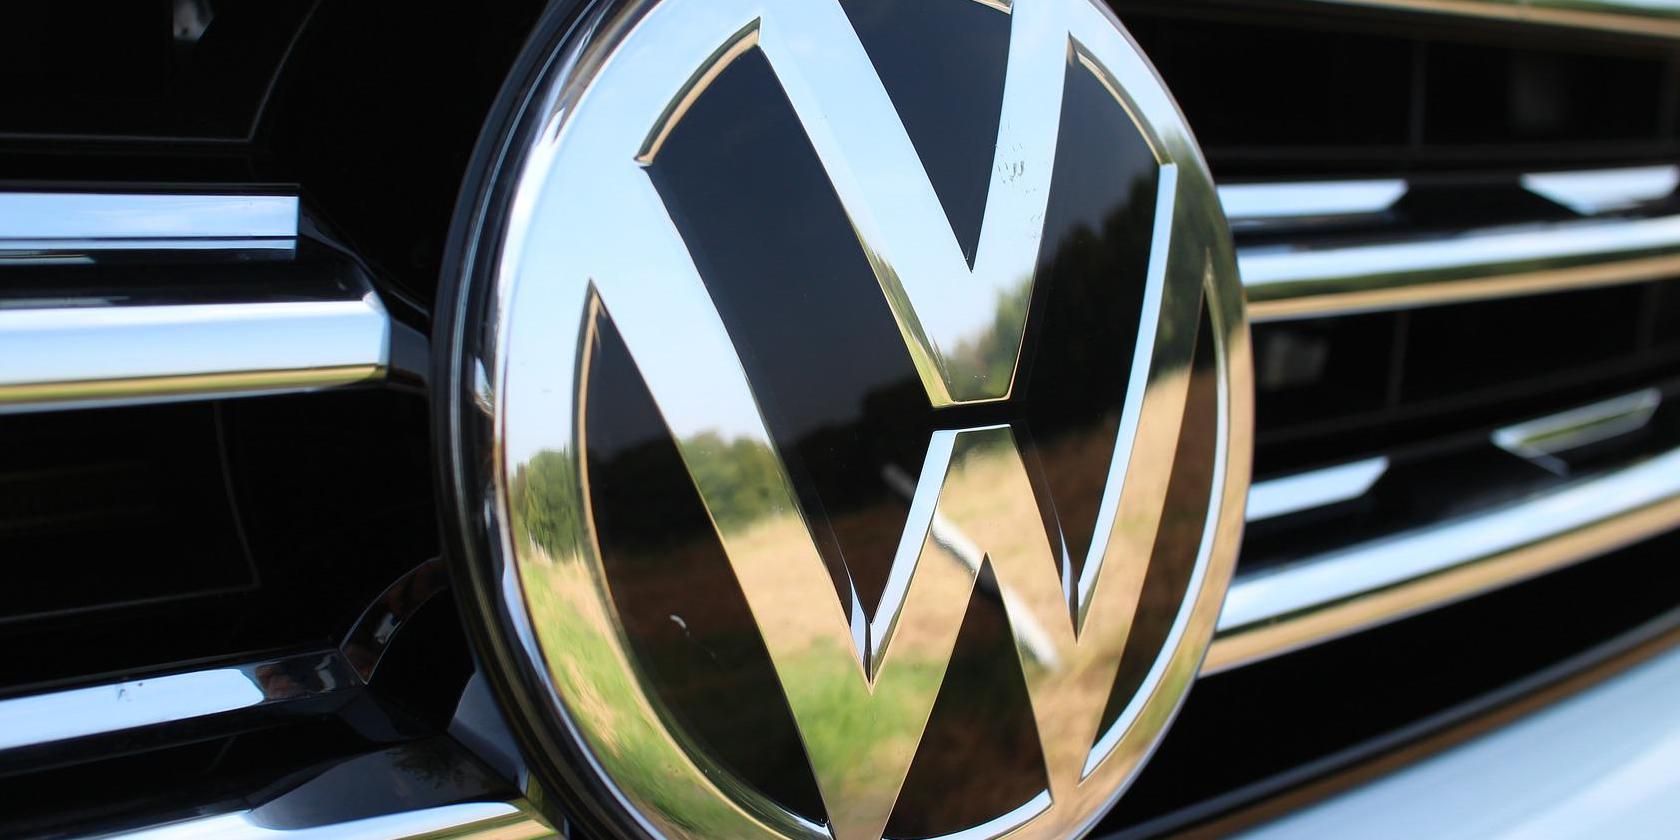 VW logo on the grill of a car